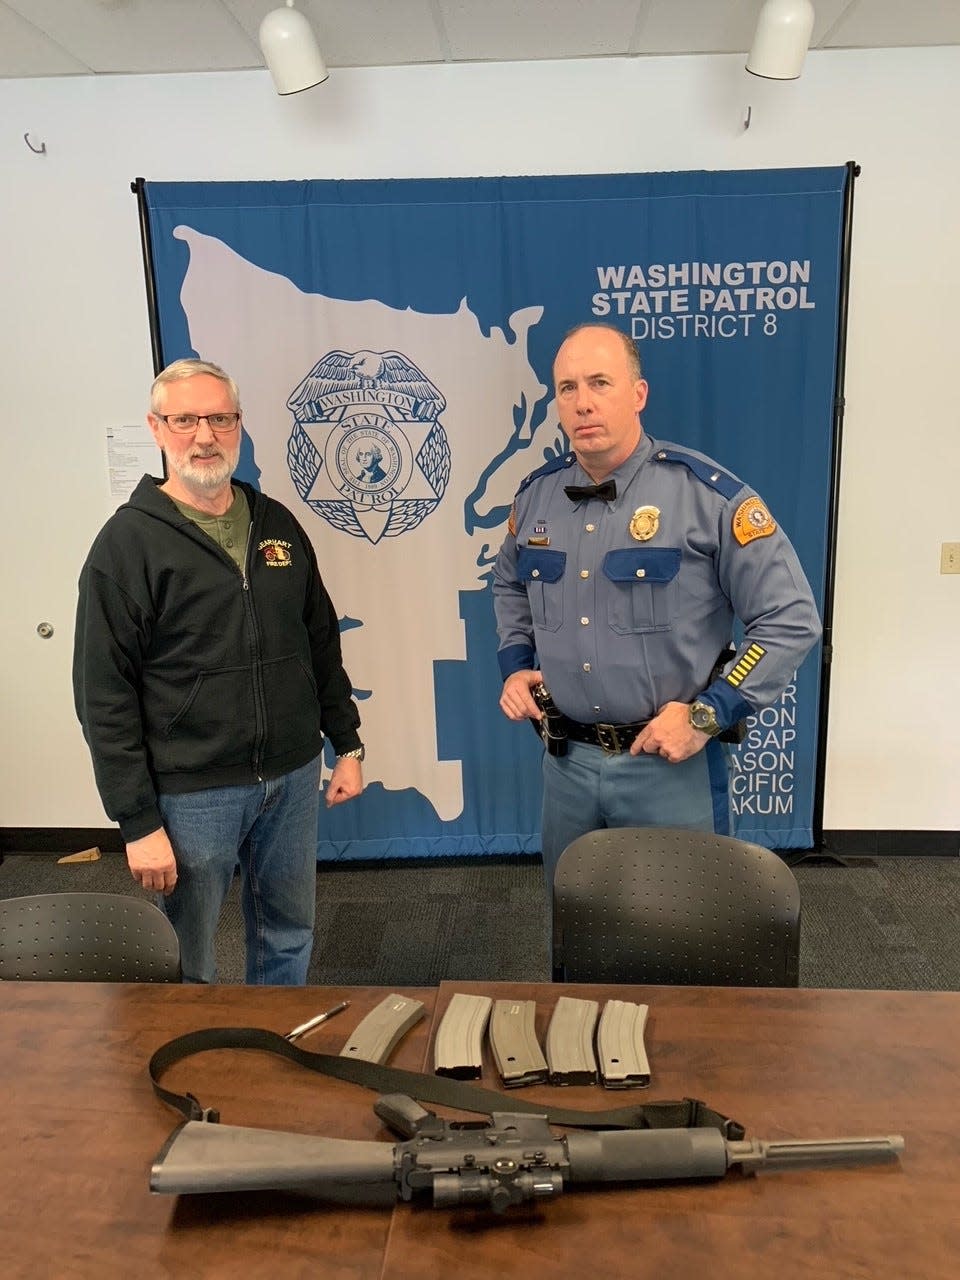 Jeff Gearhart of Port Orchard and WSP Lt. Bill Steen are shown Thursday at the State Patrol's district headquarters in Bremerton with Gearhart's AR-15-type rifle. After reflecting on recent massacres using a similar firearm, Gearhart surrendered his rifle for destruction.